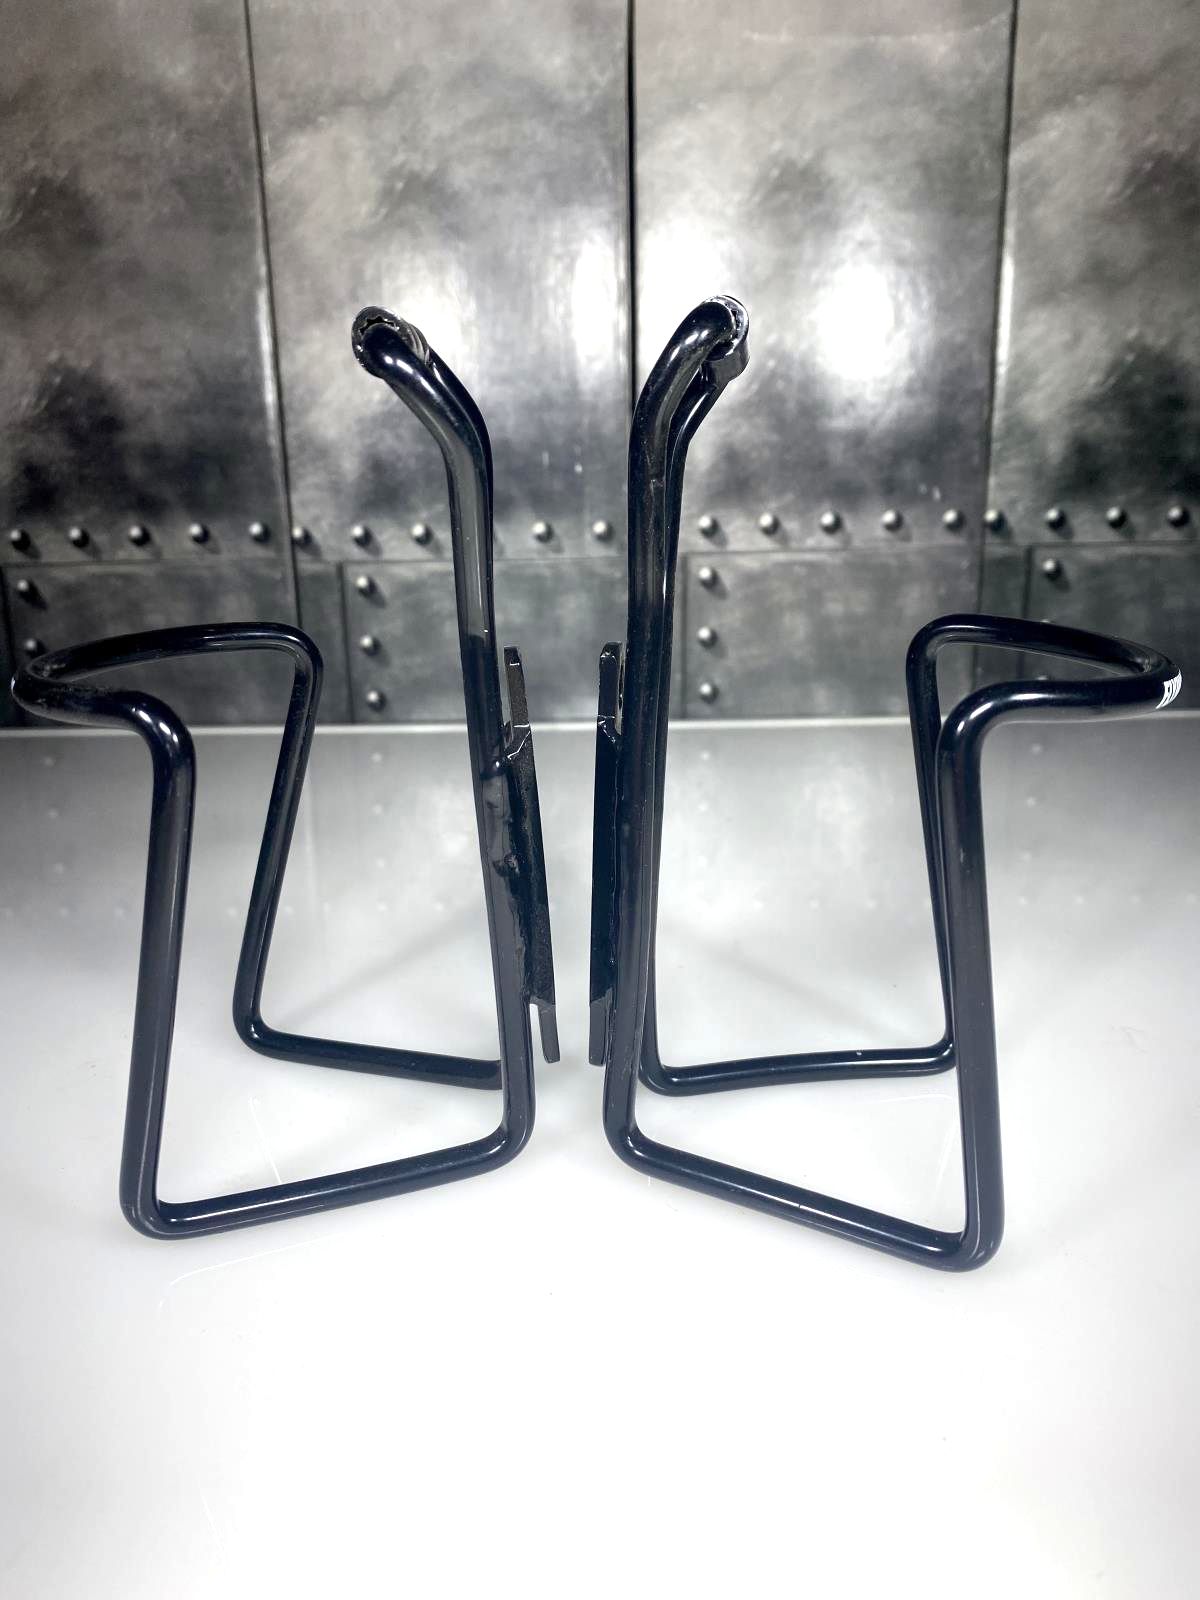 Lot Two of Black Flying Wheel Bicycles Bike Water Bottle Cage New